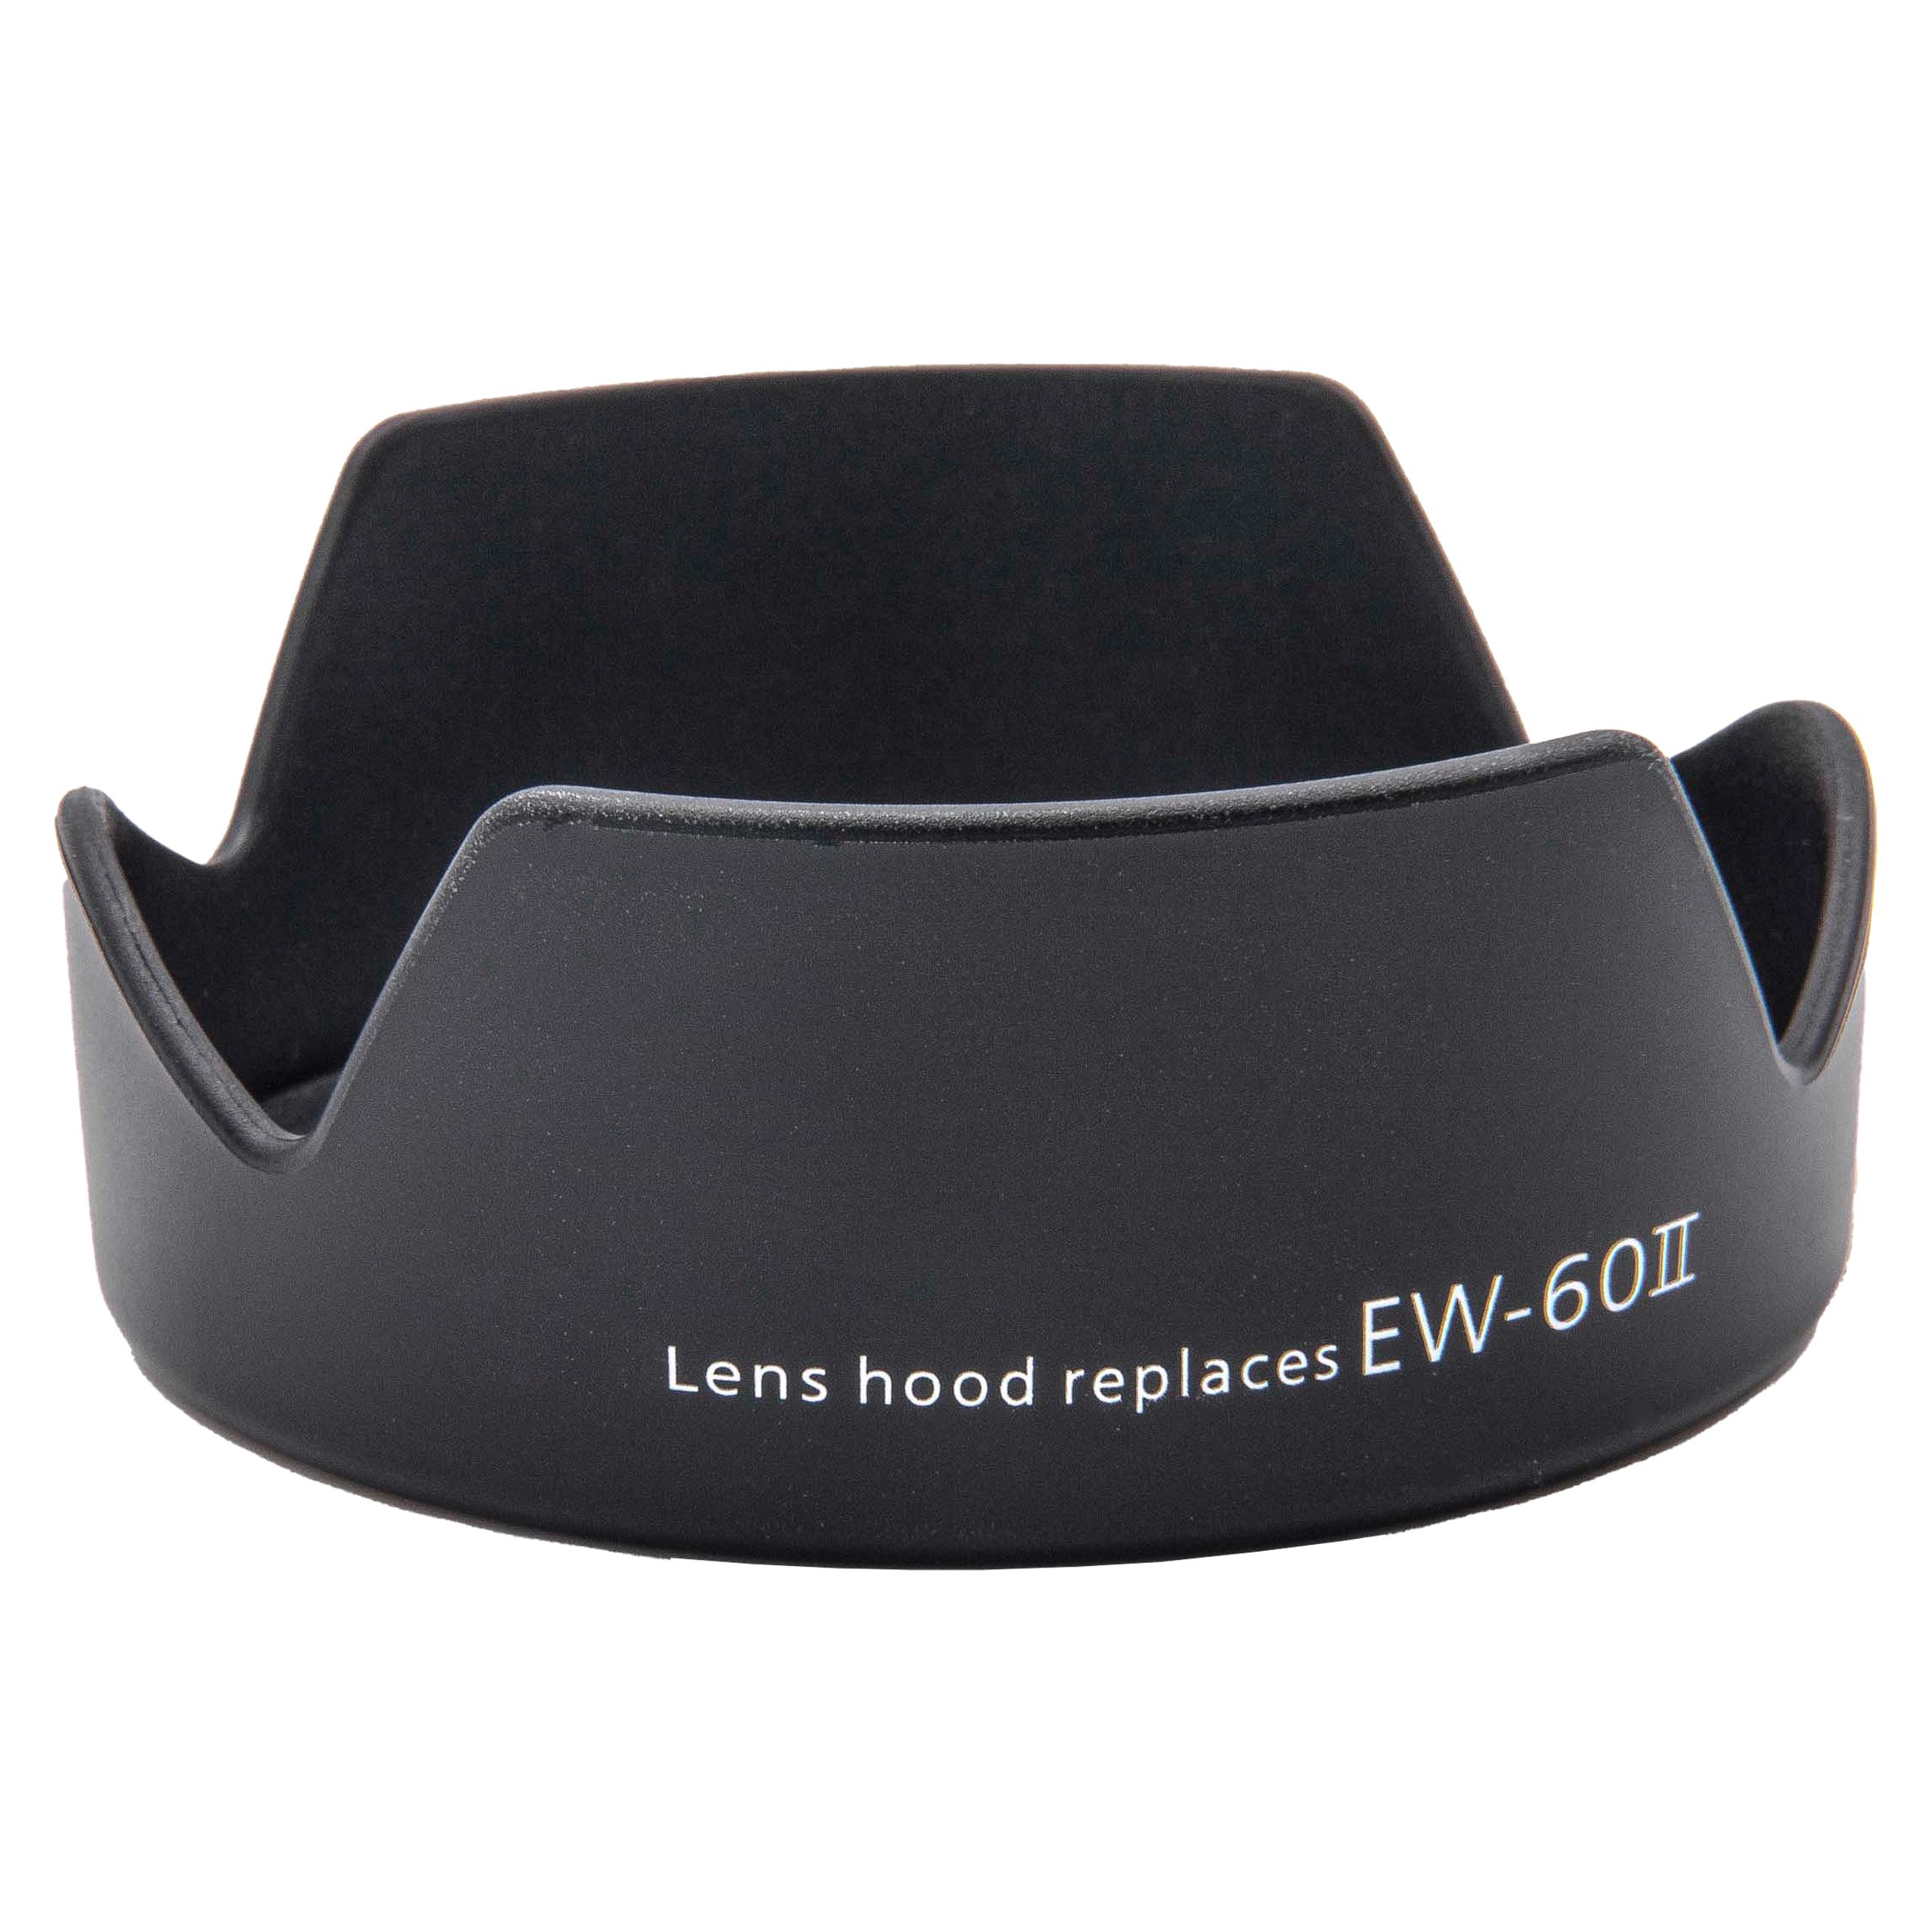 Lens Hood as Replacement for Canon Lens EW-60II